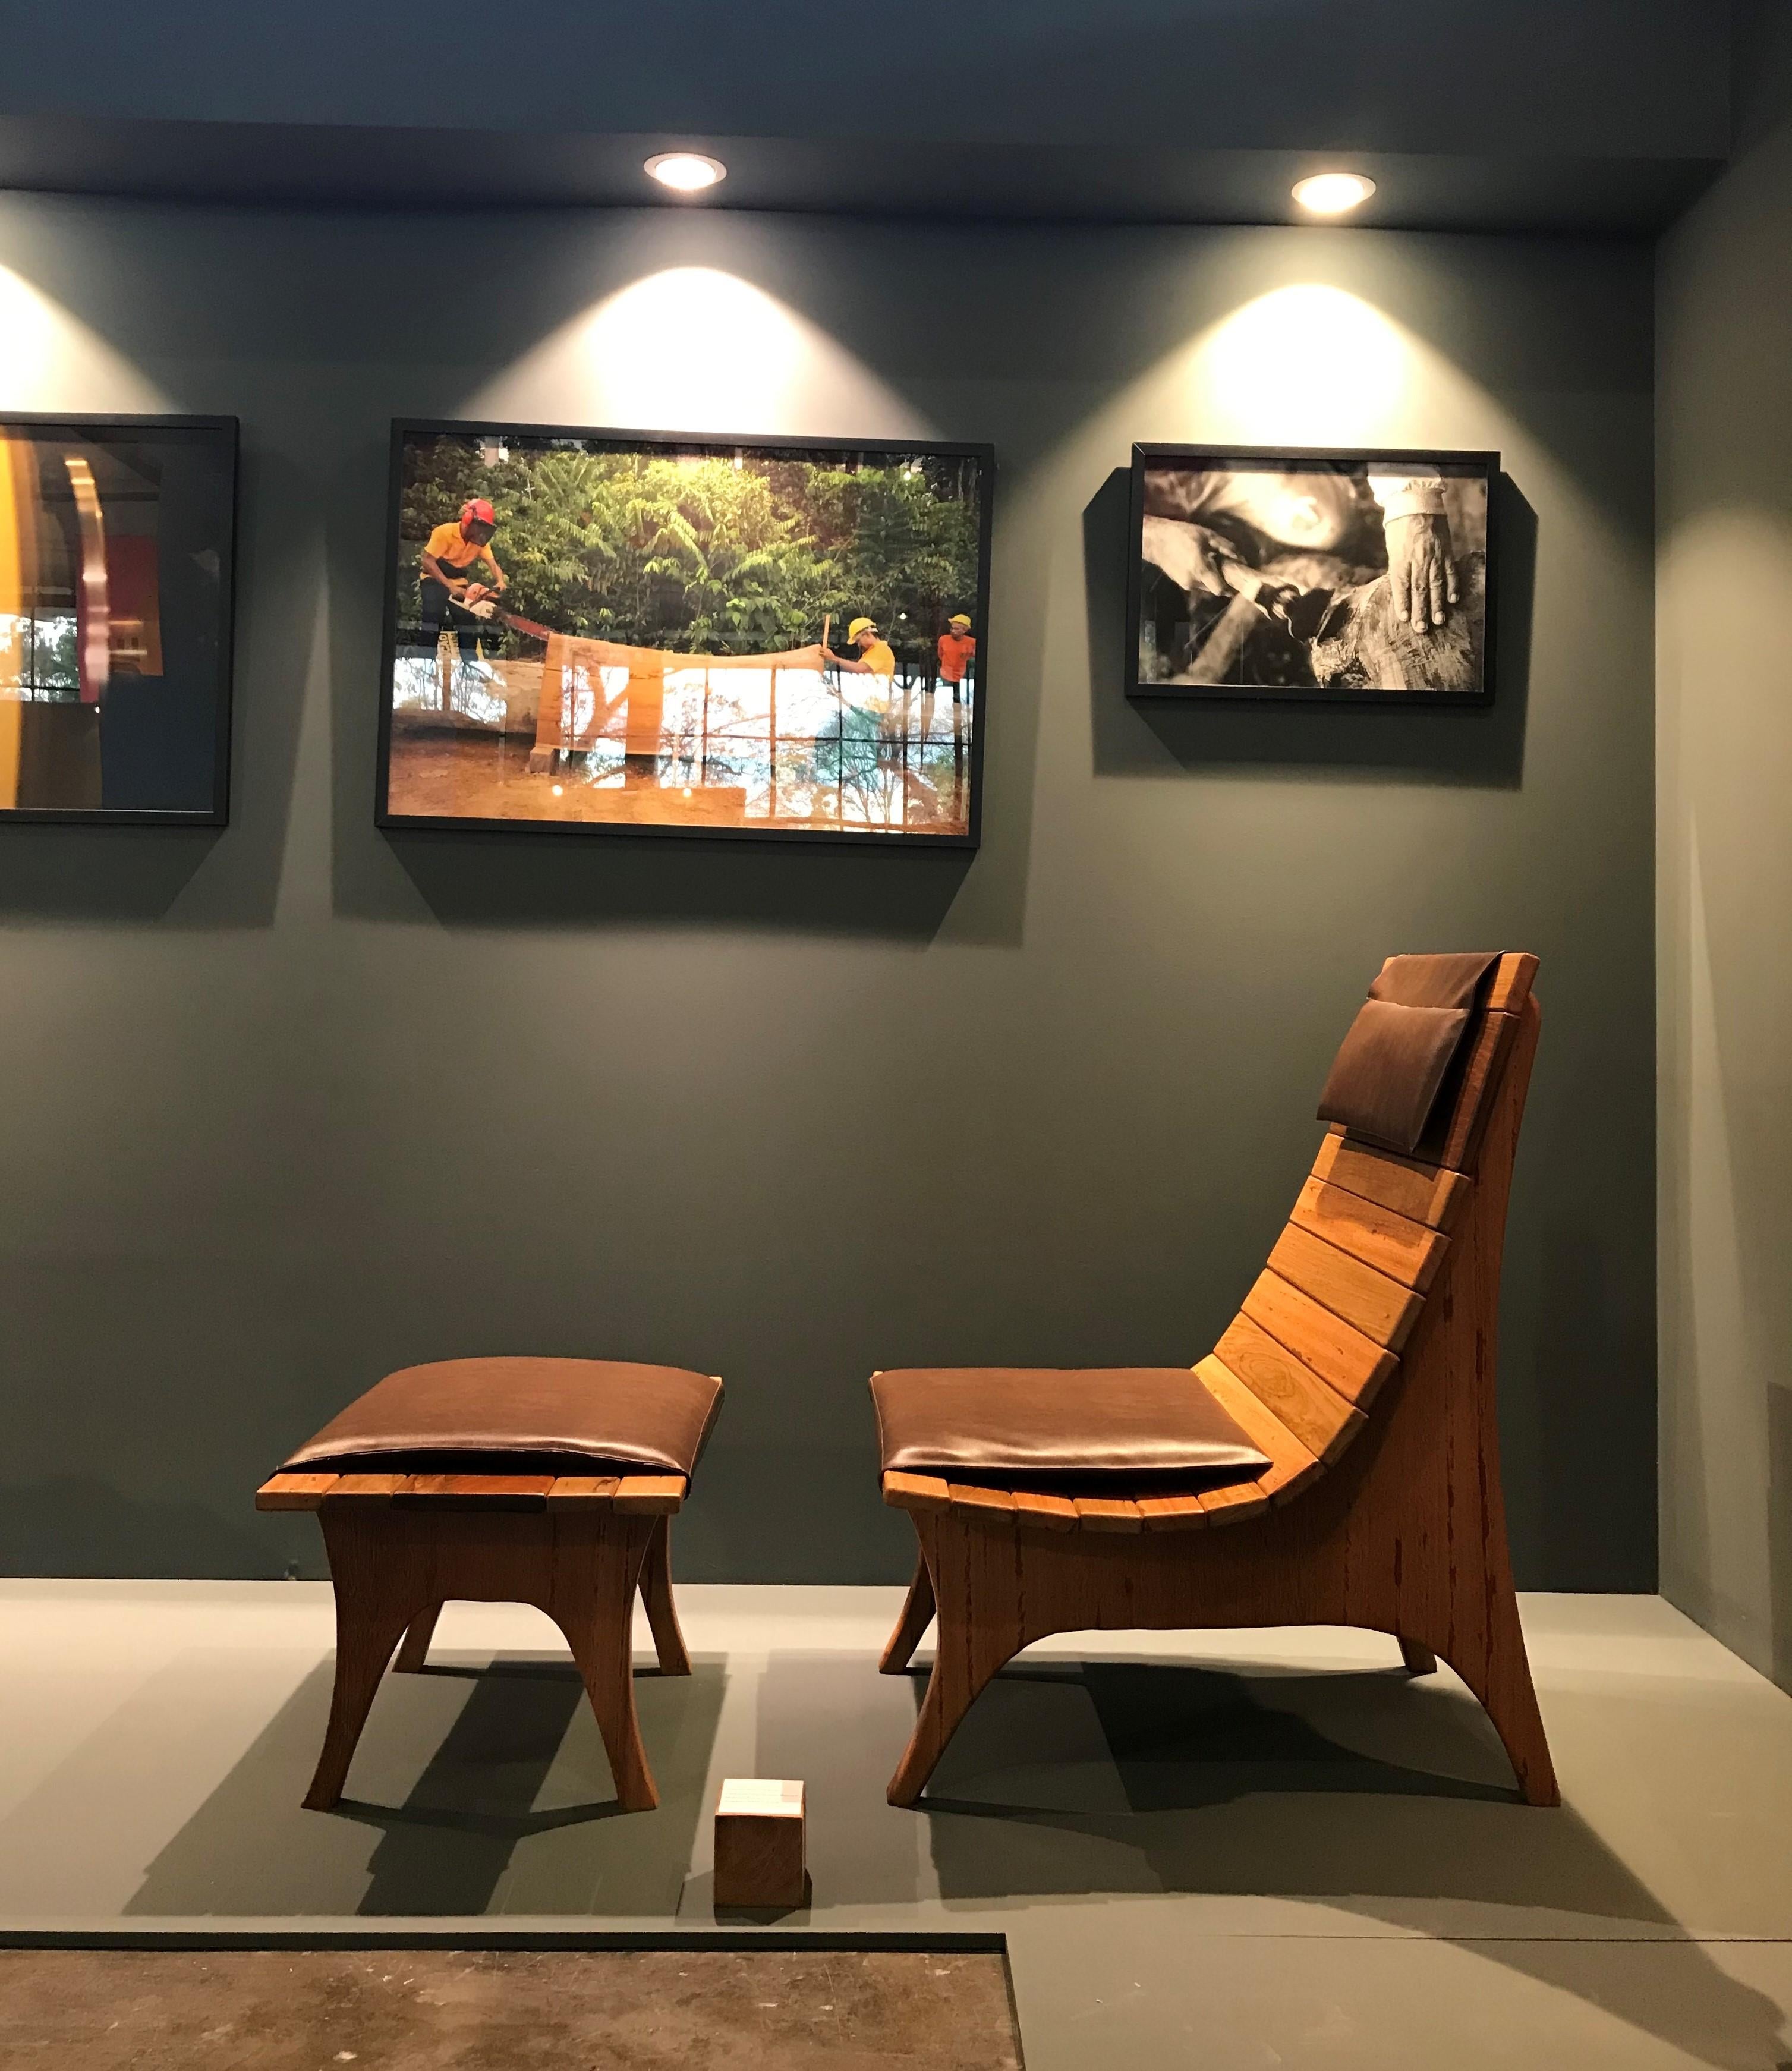 Alessandra Delgado created this unique pieces with Amazonian rare woods certified FSC, angelim pedra and muiracatiara. They are made by a local community of Indian descendents who need the wood work as a complementary gain for their living.
The